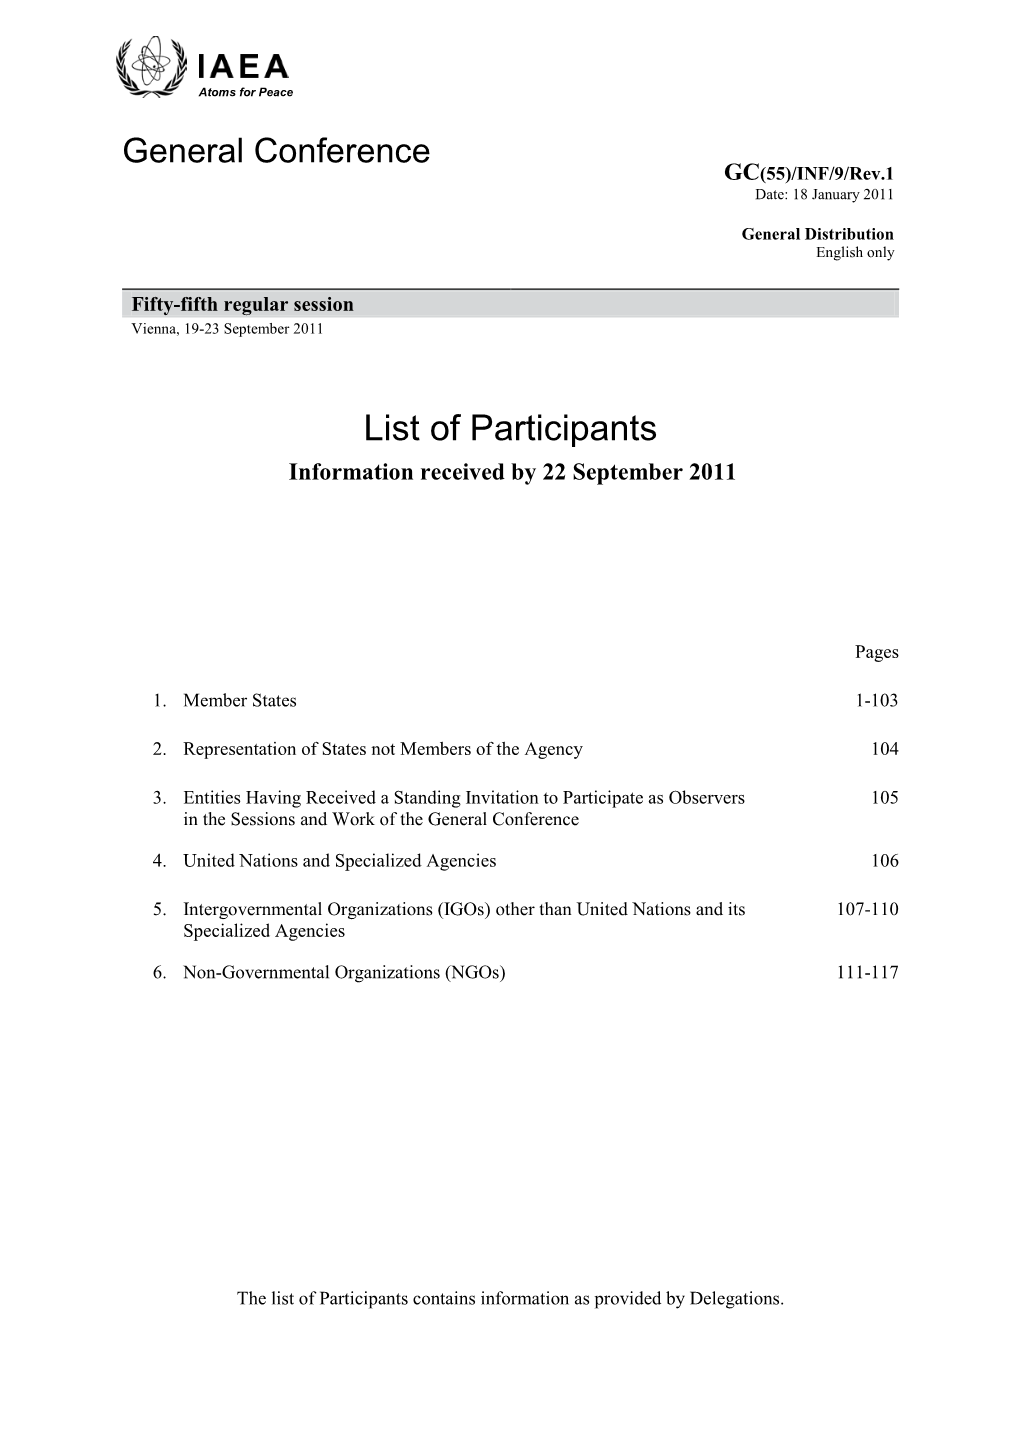 List of Participants Information Received by 22 September 2011